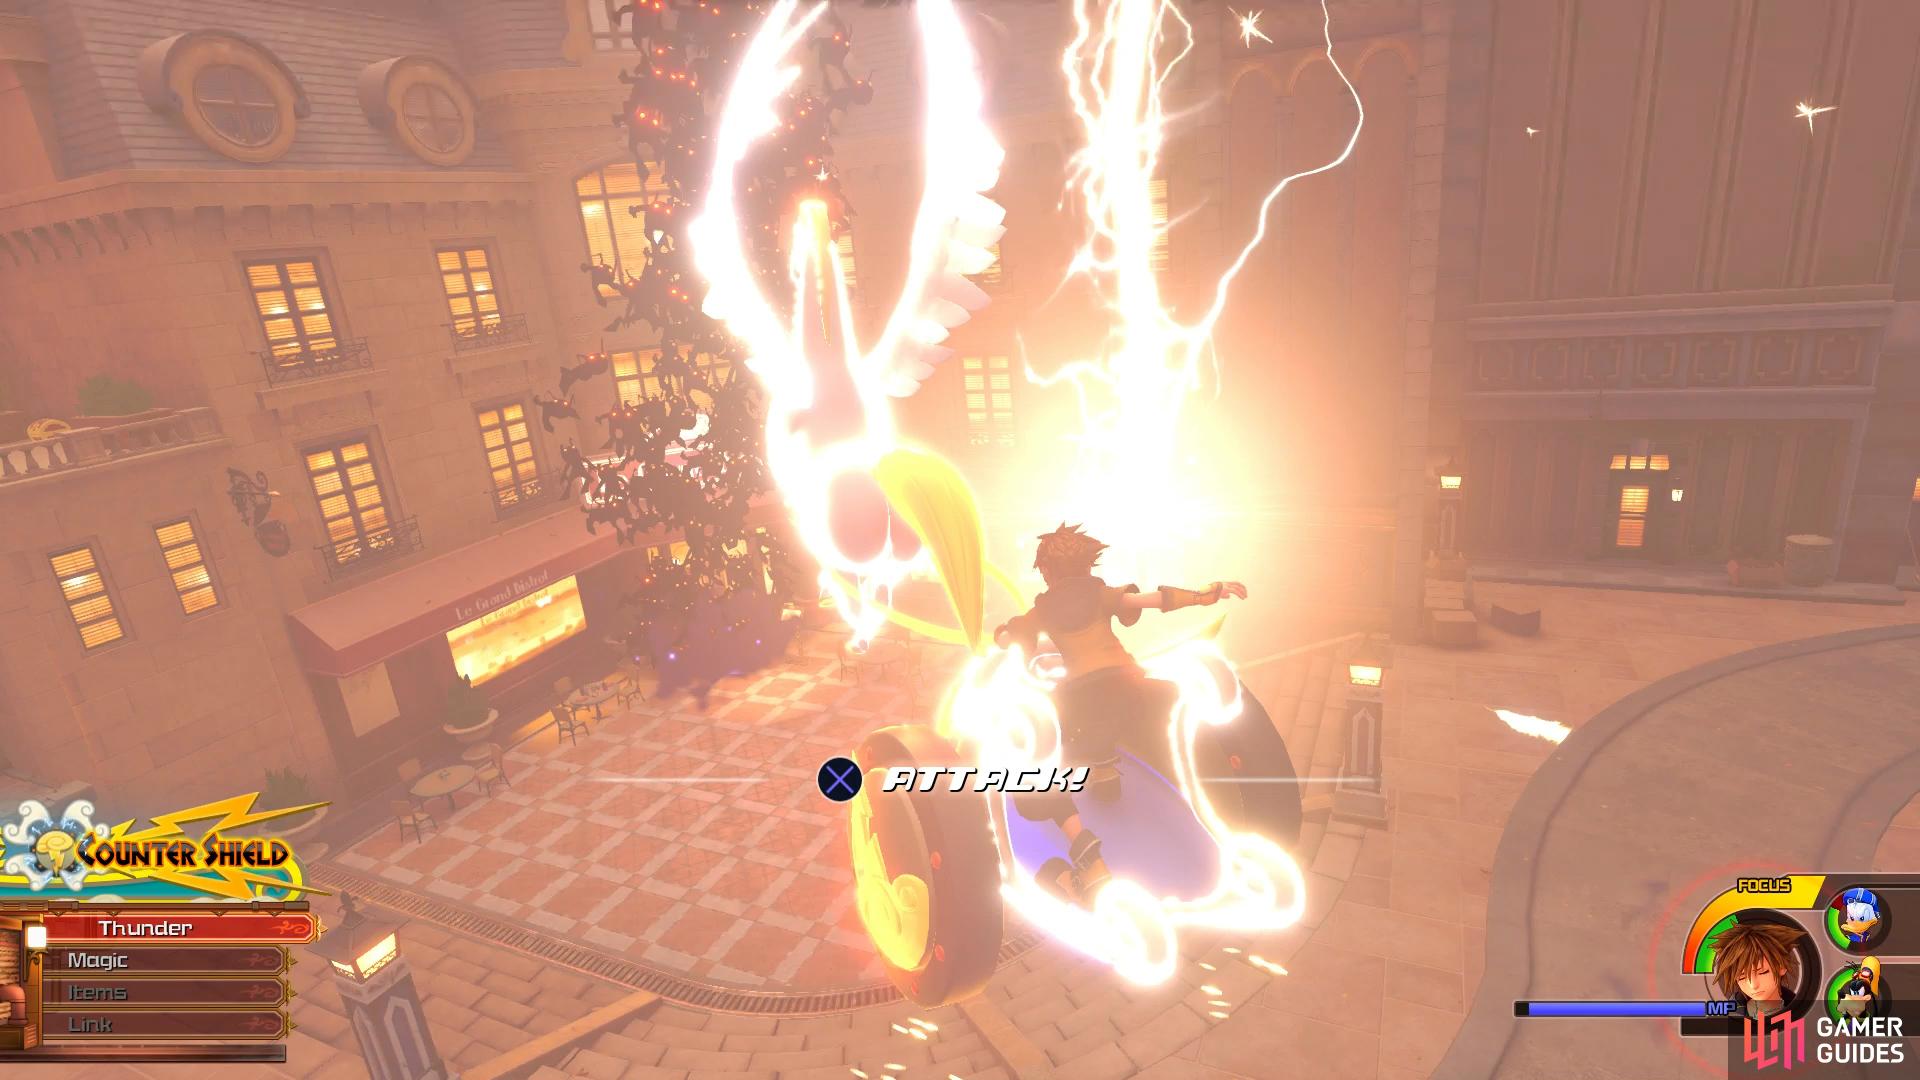 The Heros Origin Keyblades finisher is useful for dealing large damage